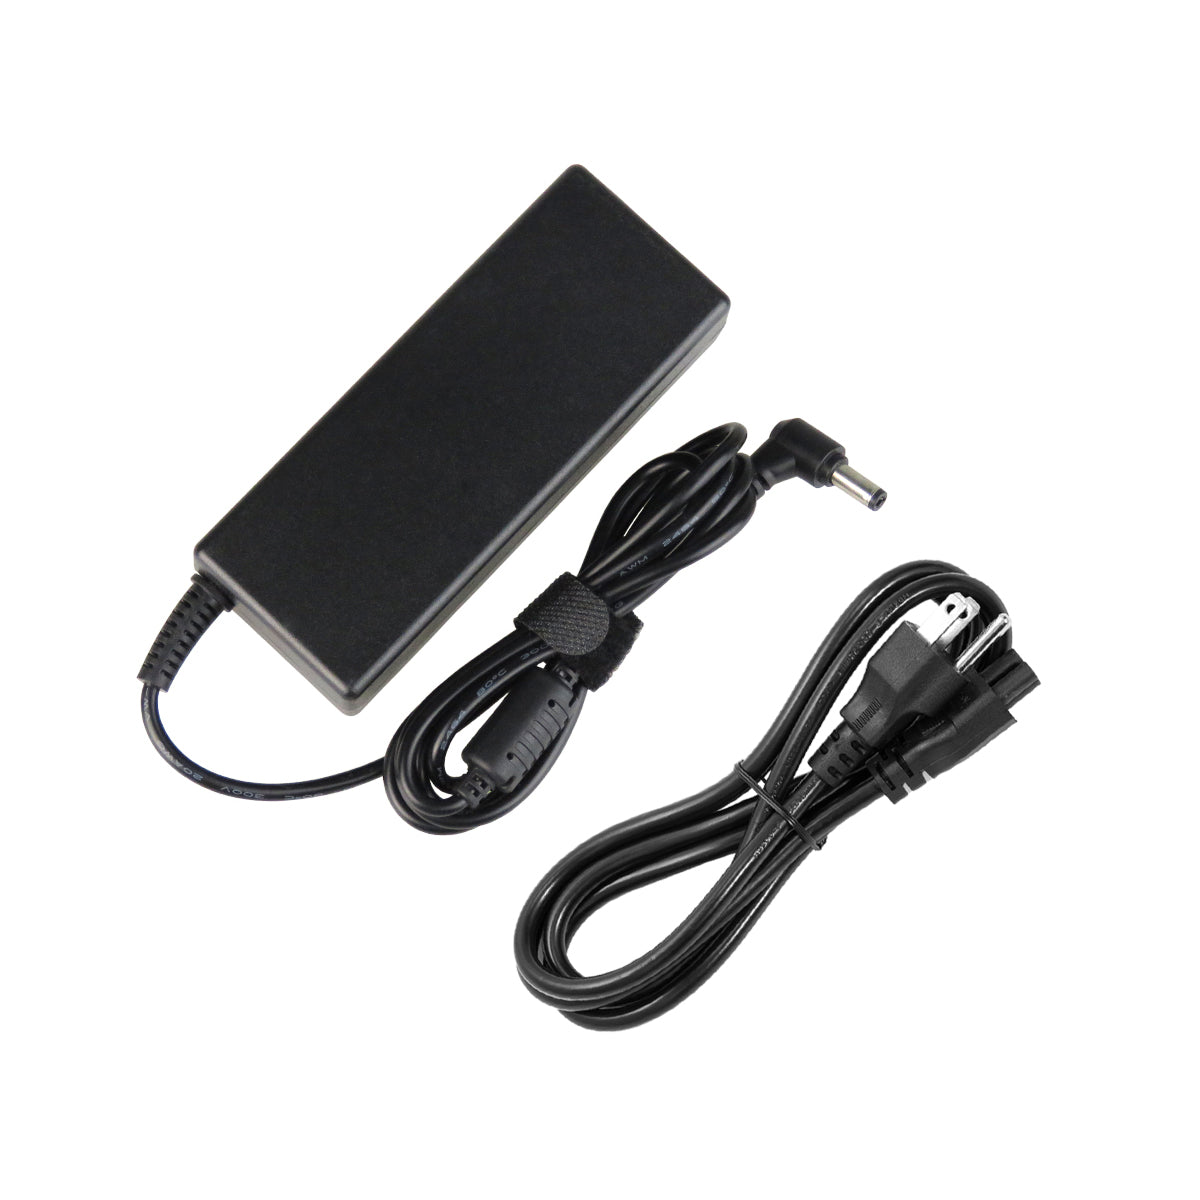 AC Adapter Charger for ASUS VX2 Notebook.